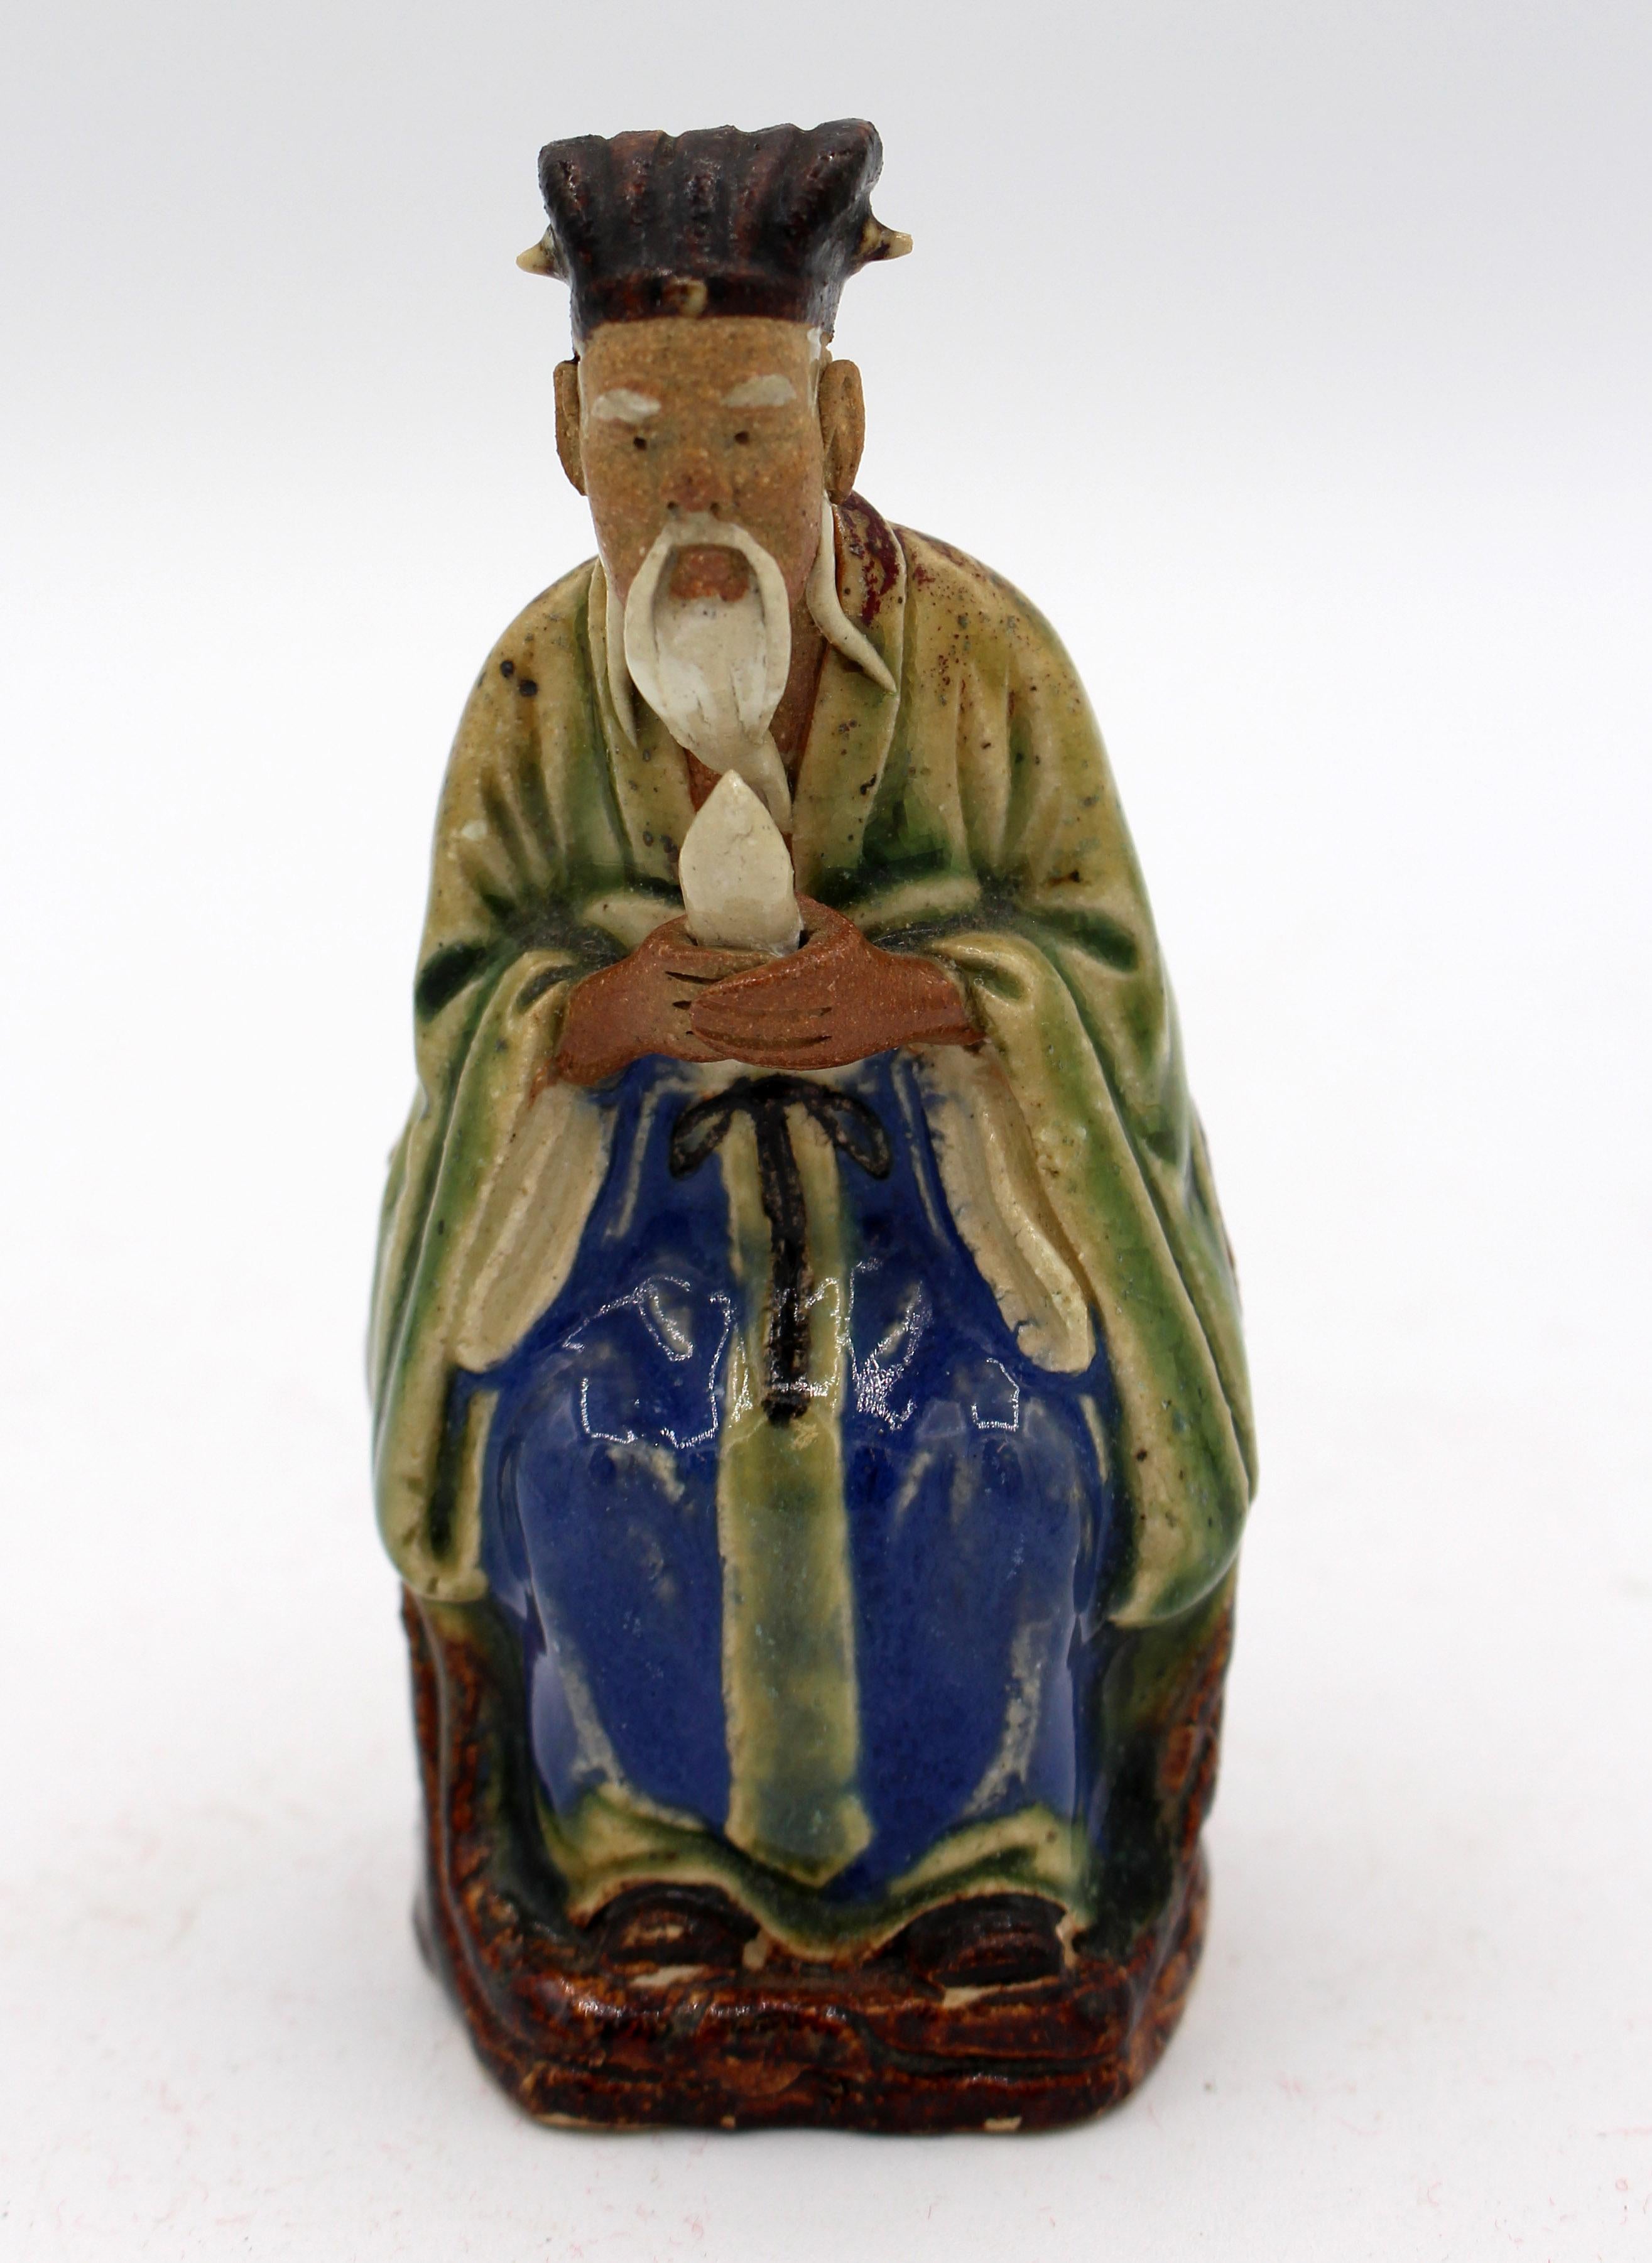 A fine Chinese mud man figure of a seated wise old man, c.1892-1904 (World's Fairs). The face is finely detailed, the colors subtle. Indecipherable impressed mark. Measures: 4 1/4